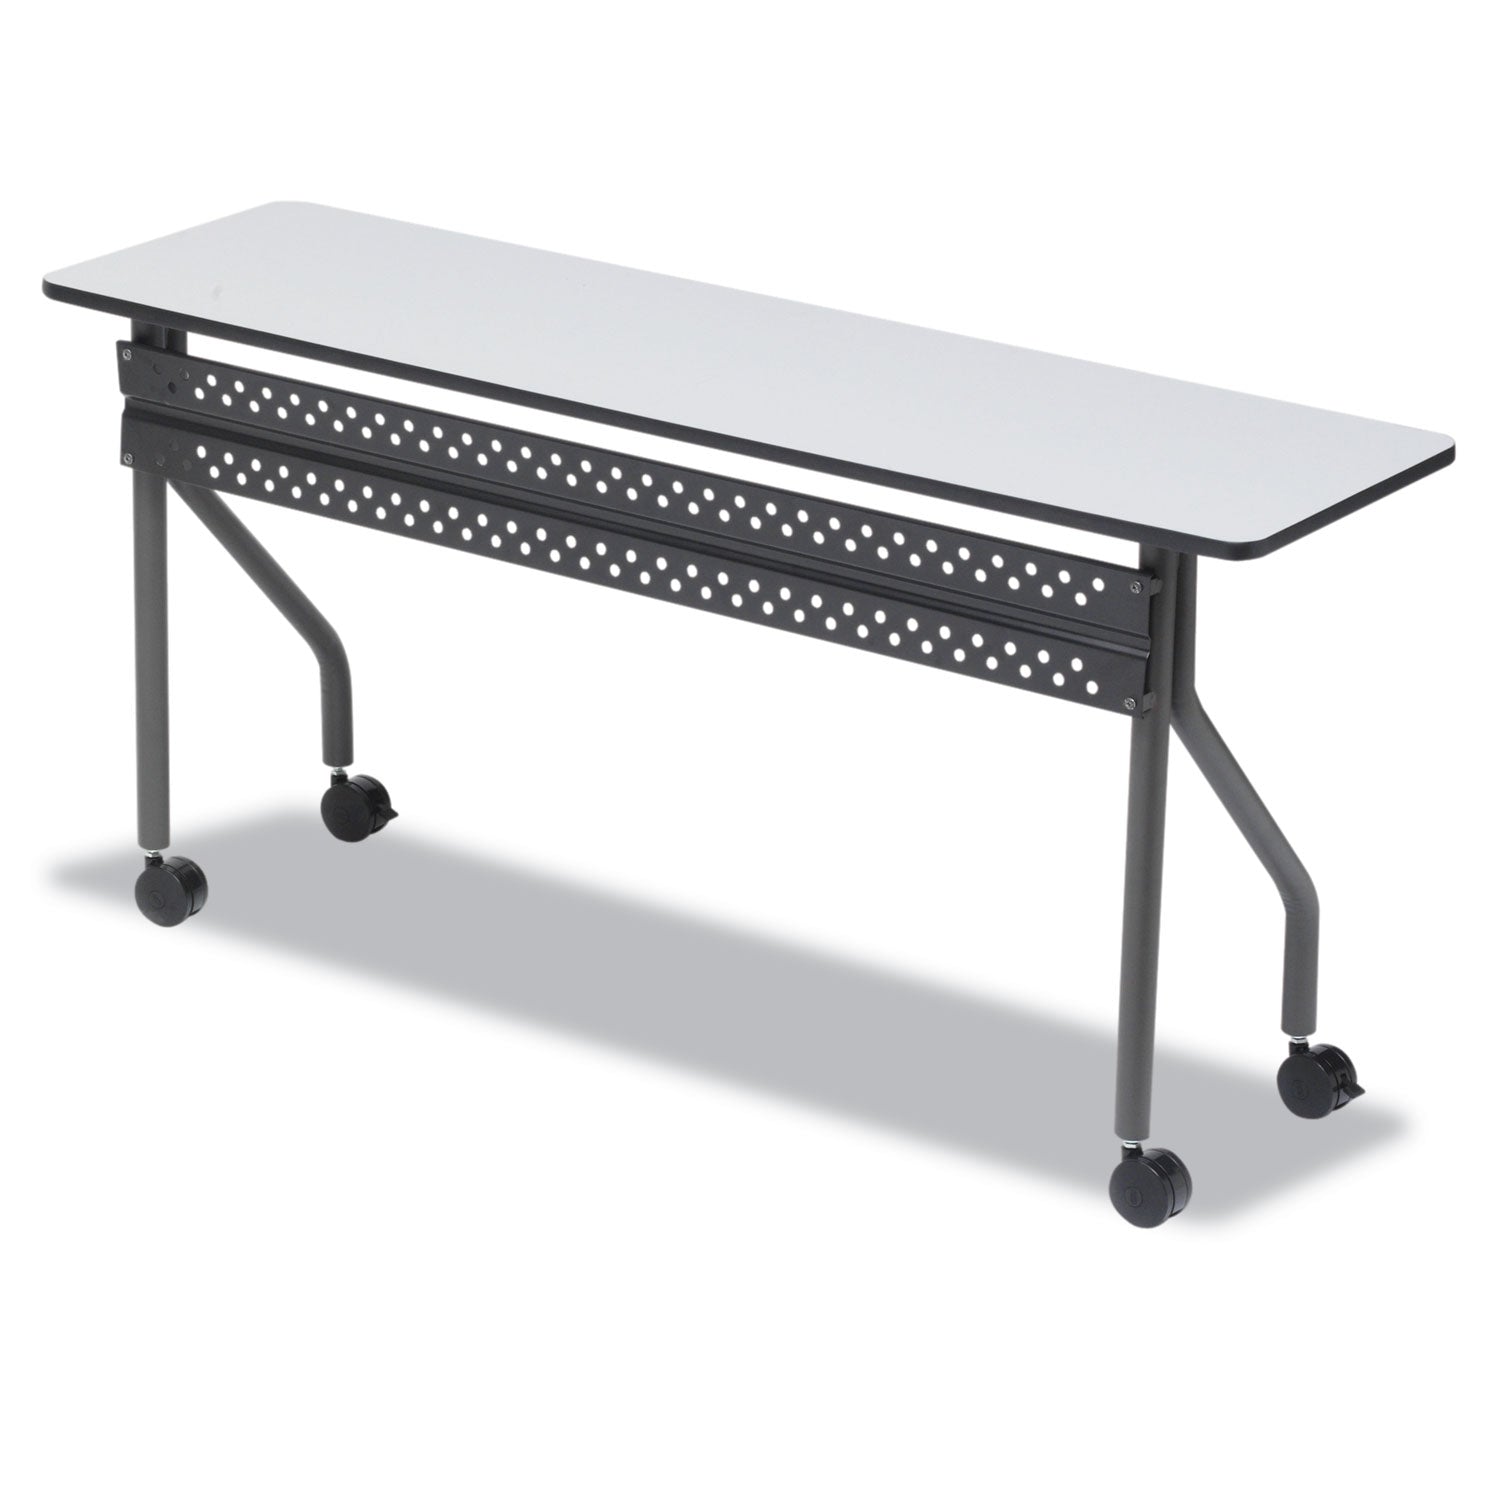 OfficeWorks Mobile Training Table, Rectangular, 72" x 18" x 29", Gray/Charcoal - 